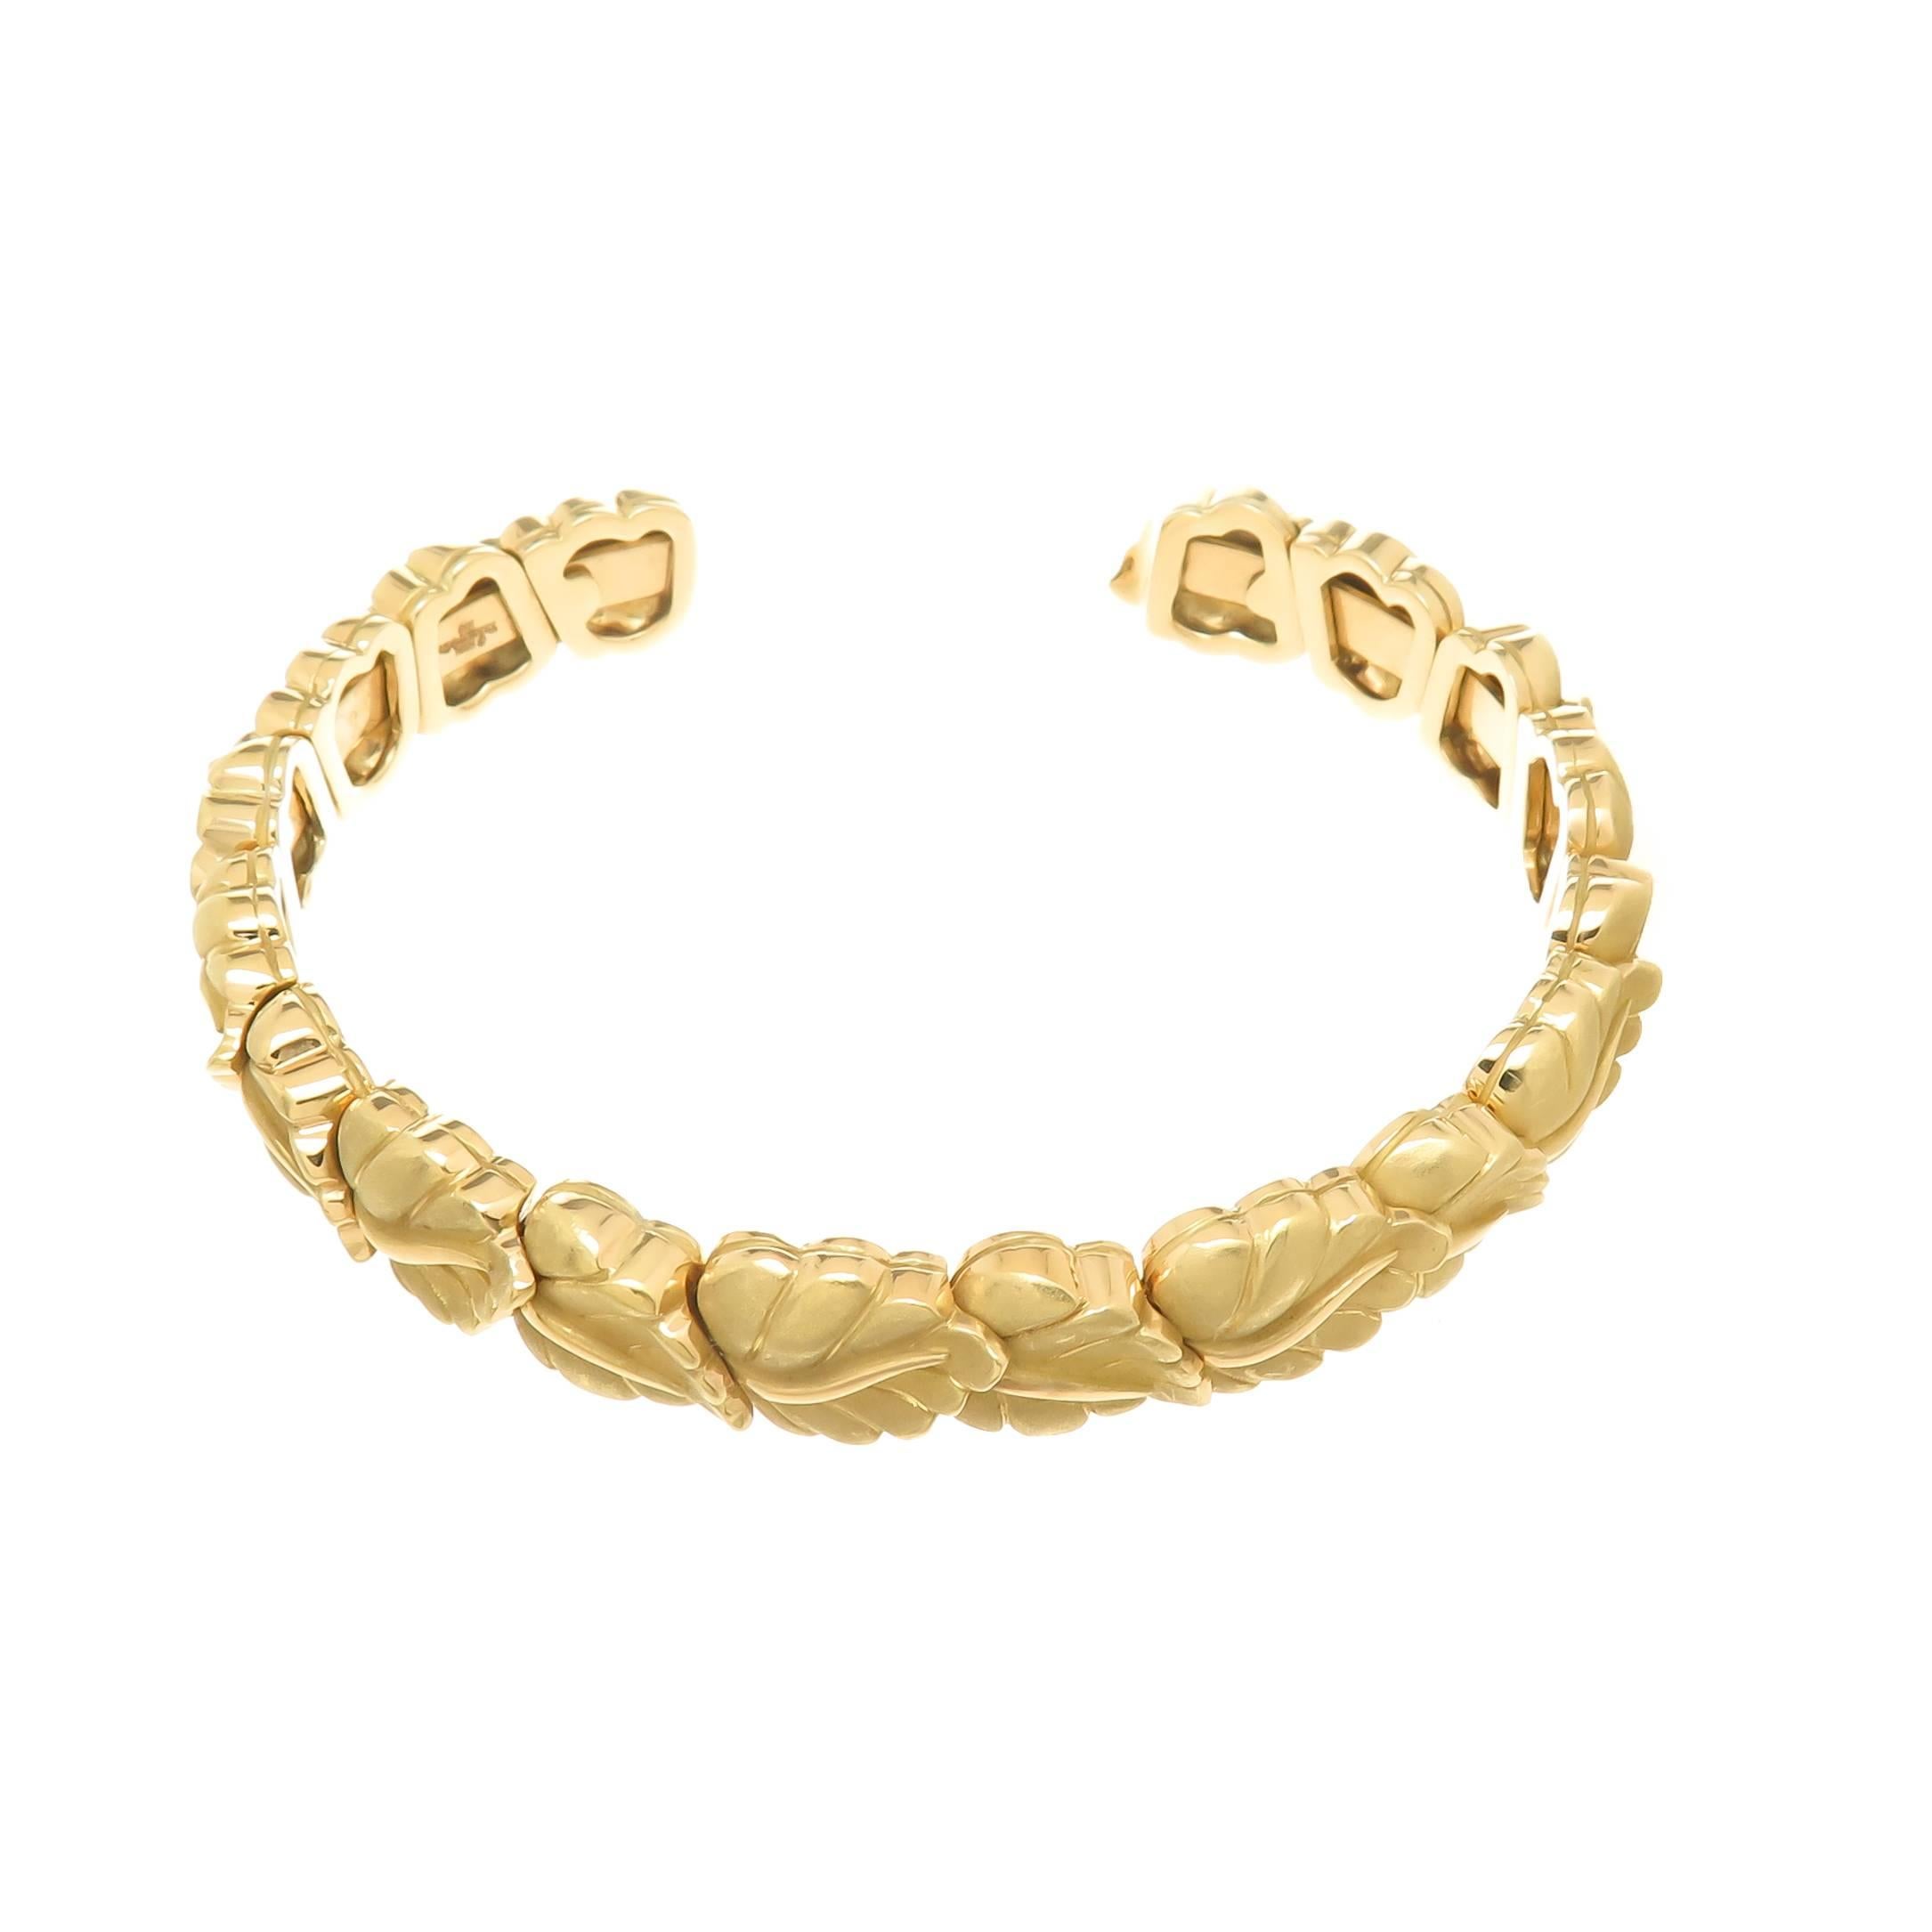 Circa 2002 Tiffany & Company 18K Yellow Gold Leaf Bracelet, measuring 3/8 inch wide and having an opening of 1 inch, this bracelet is flexible with each section attached separately to give it movement and so it can fit most any wrist. The leaves are